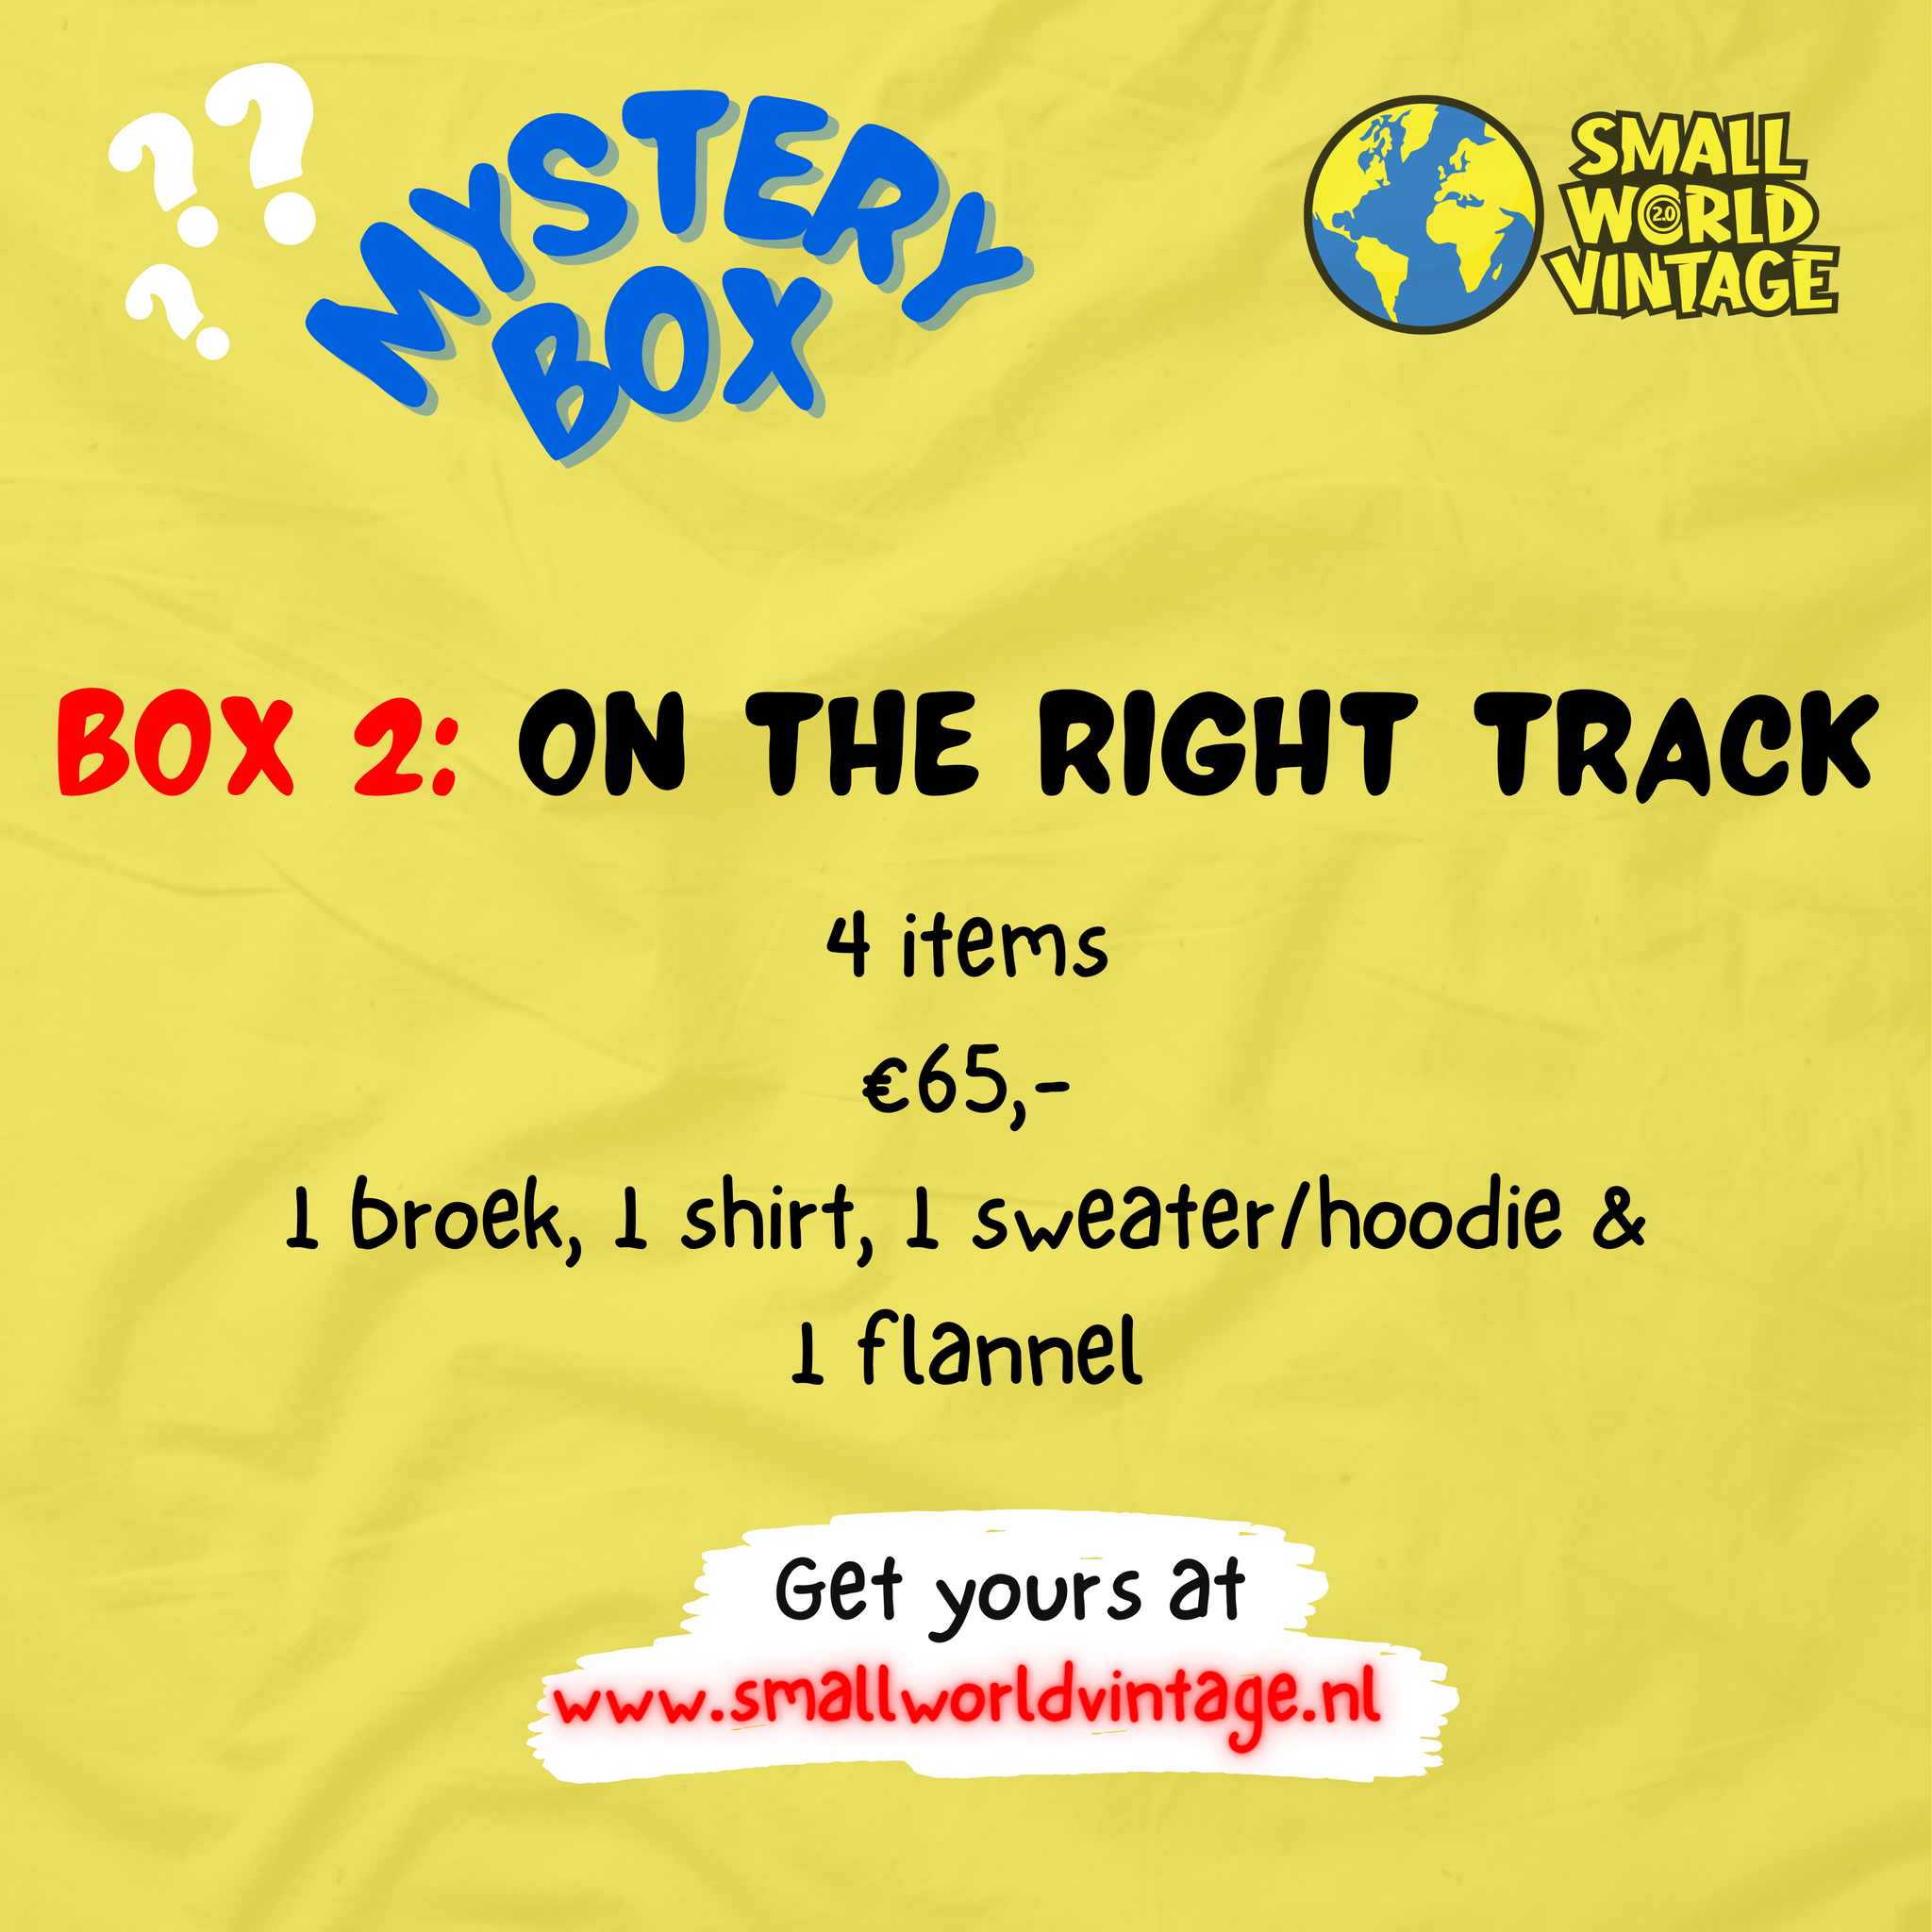 Mystery box 2: On the right track